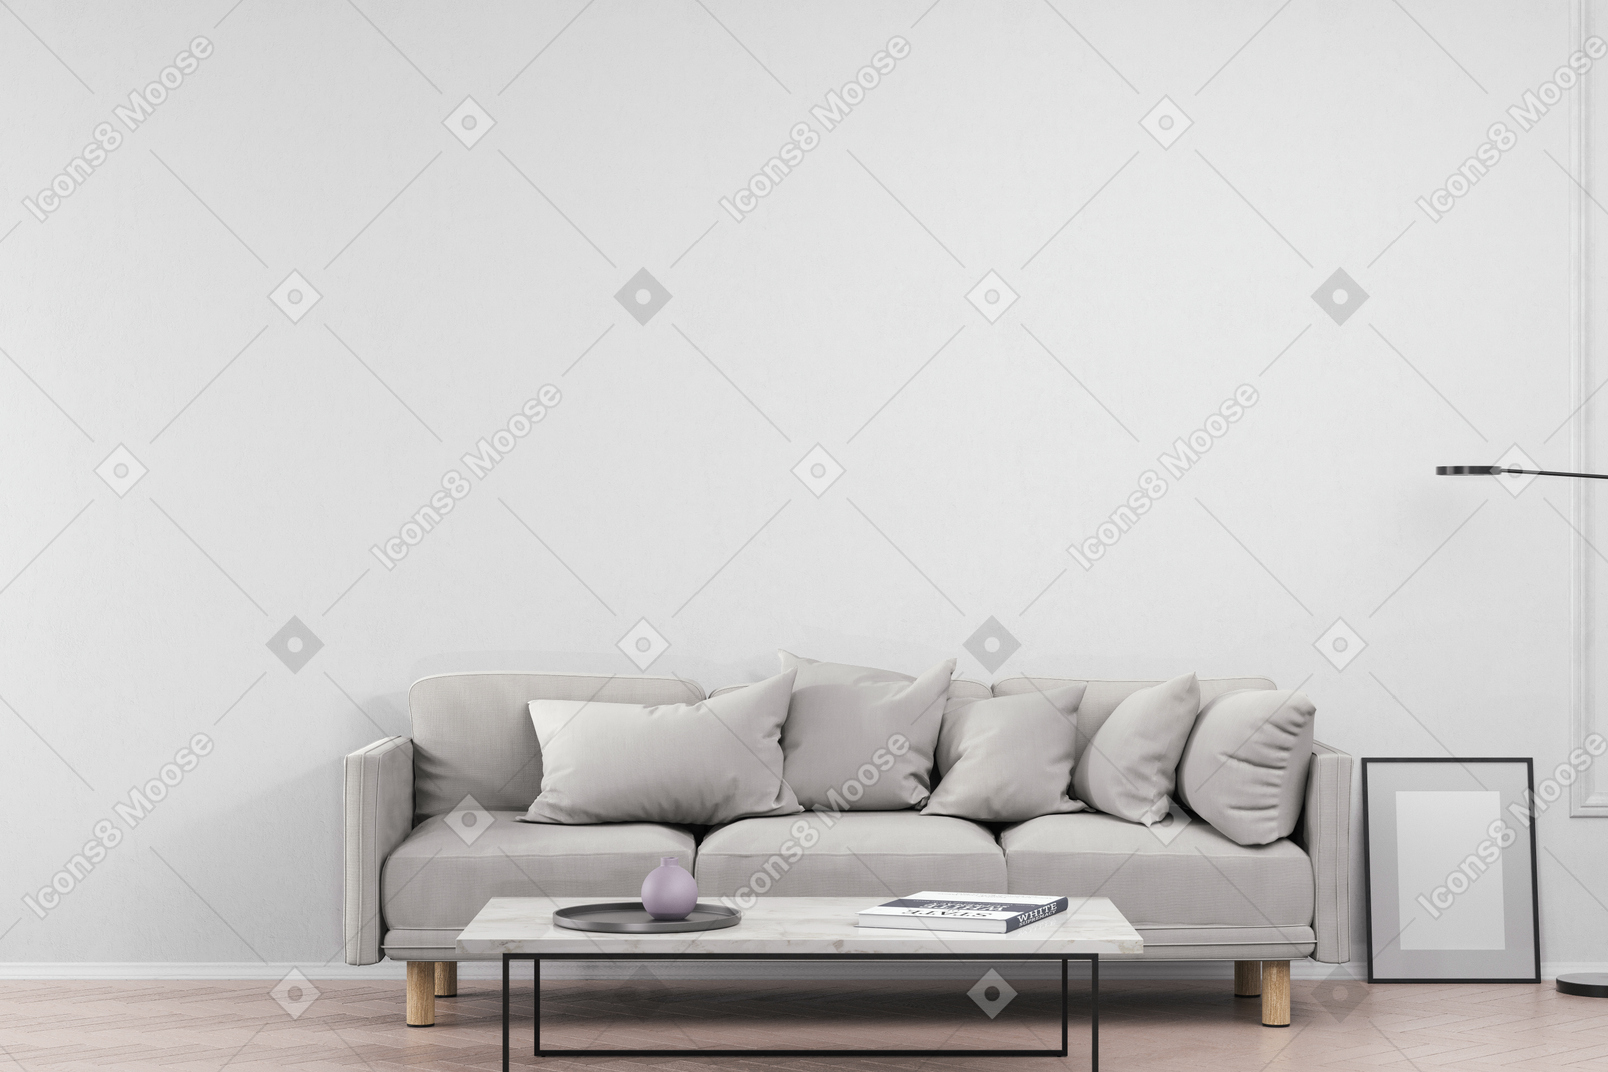 Living room with gray sofa and coffee table with decor items